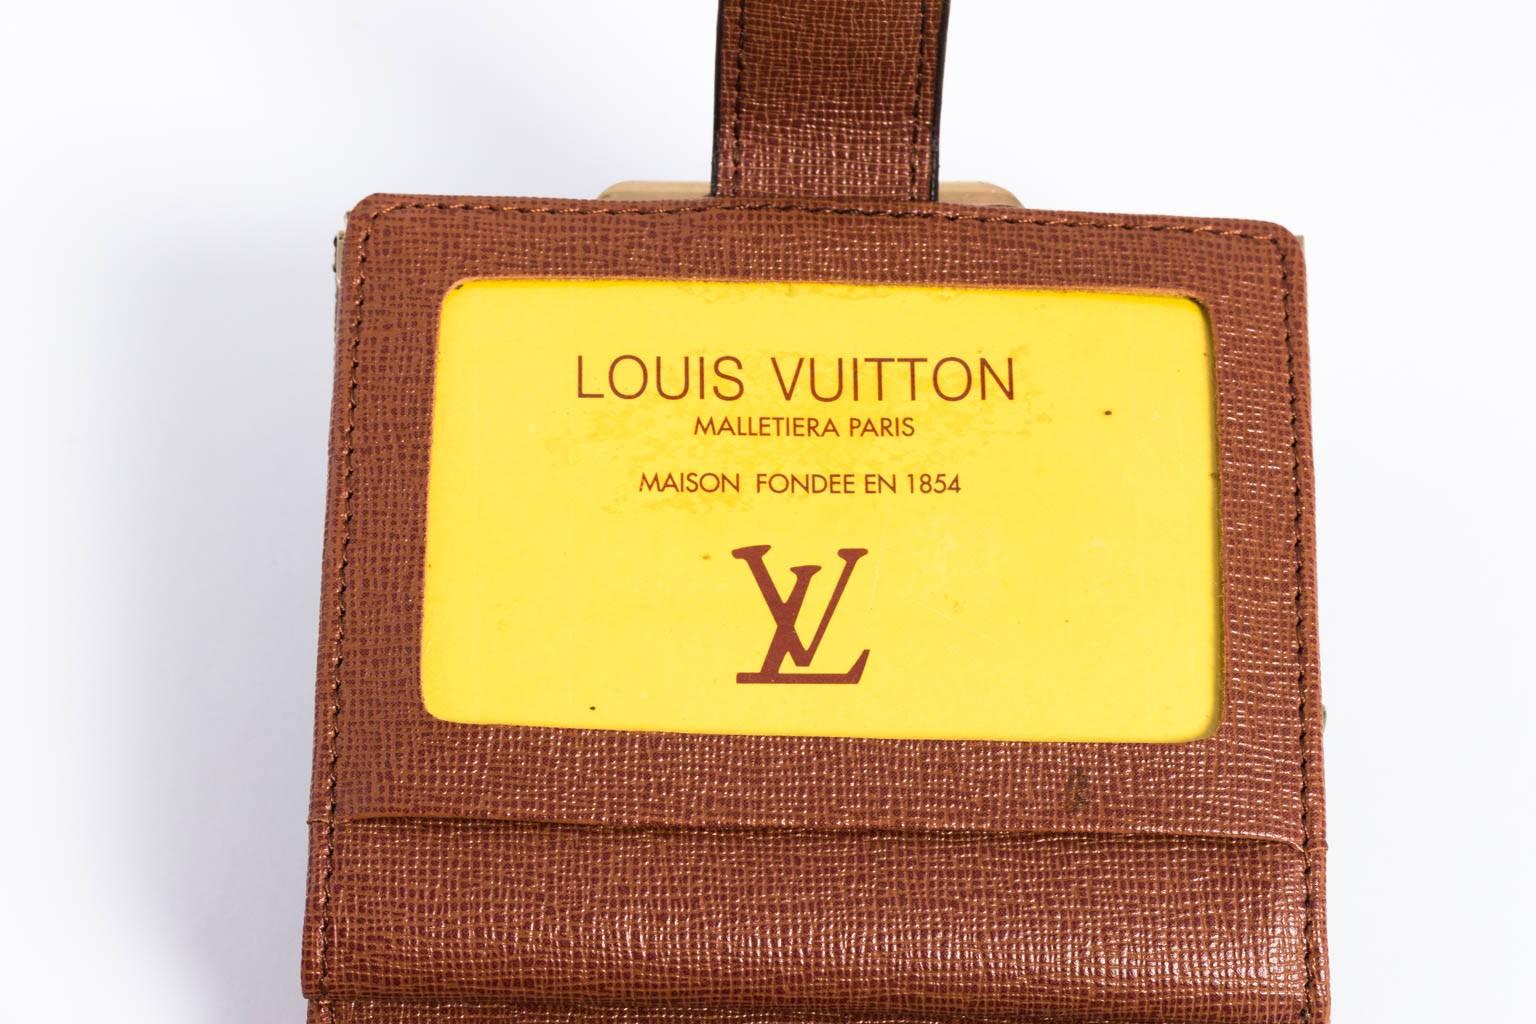 Circa late 20th century vintage Louis Vuitton wallet, complete with box in excellent condition.
